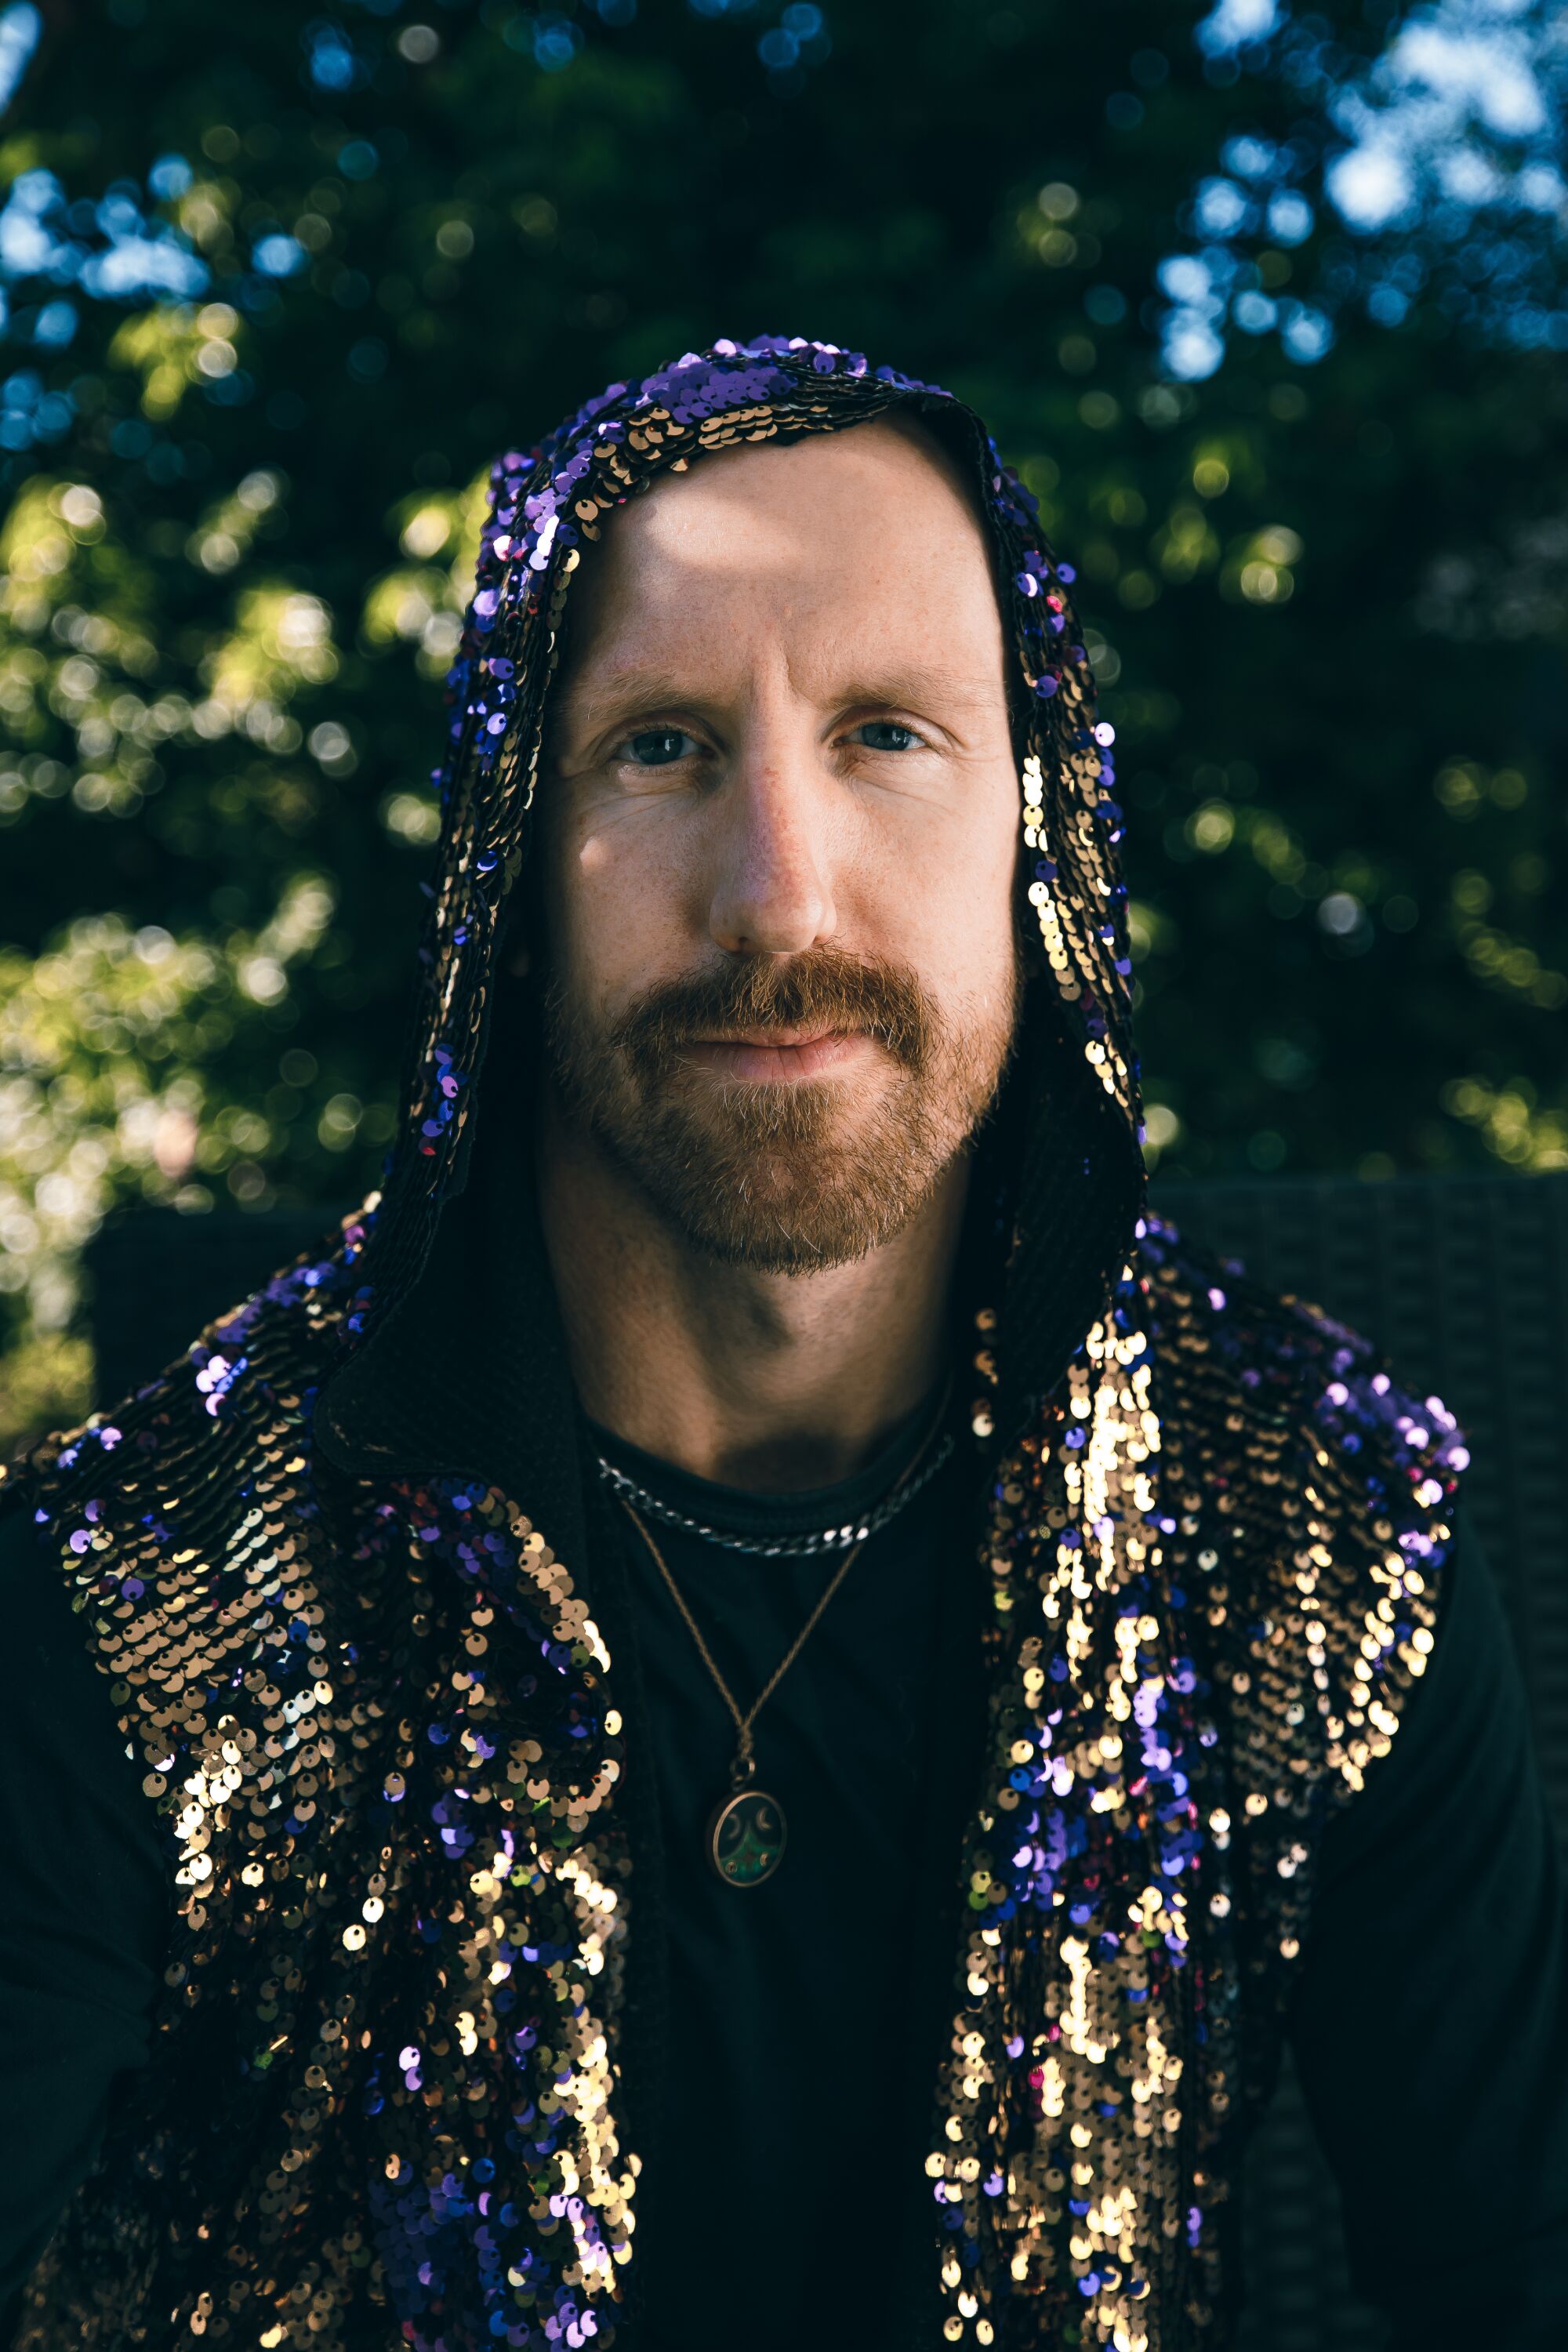 A man with a goatee and mustache, wearing a glittery hoodie.